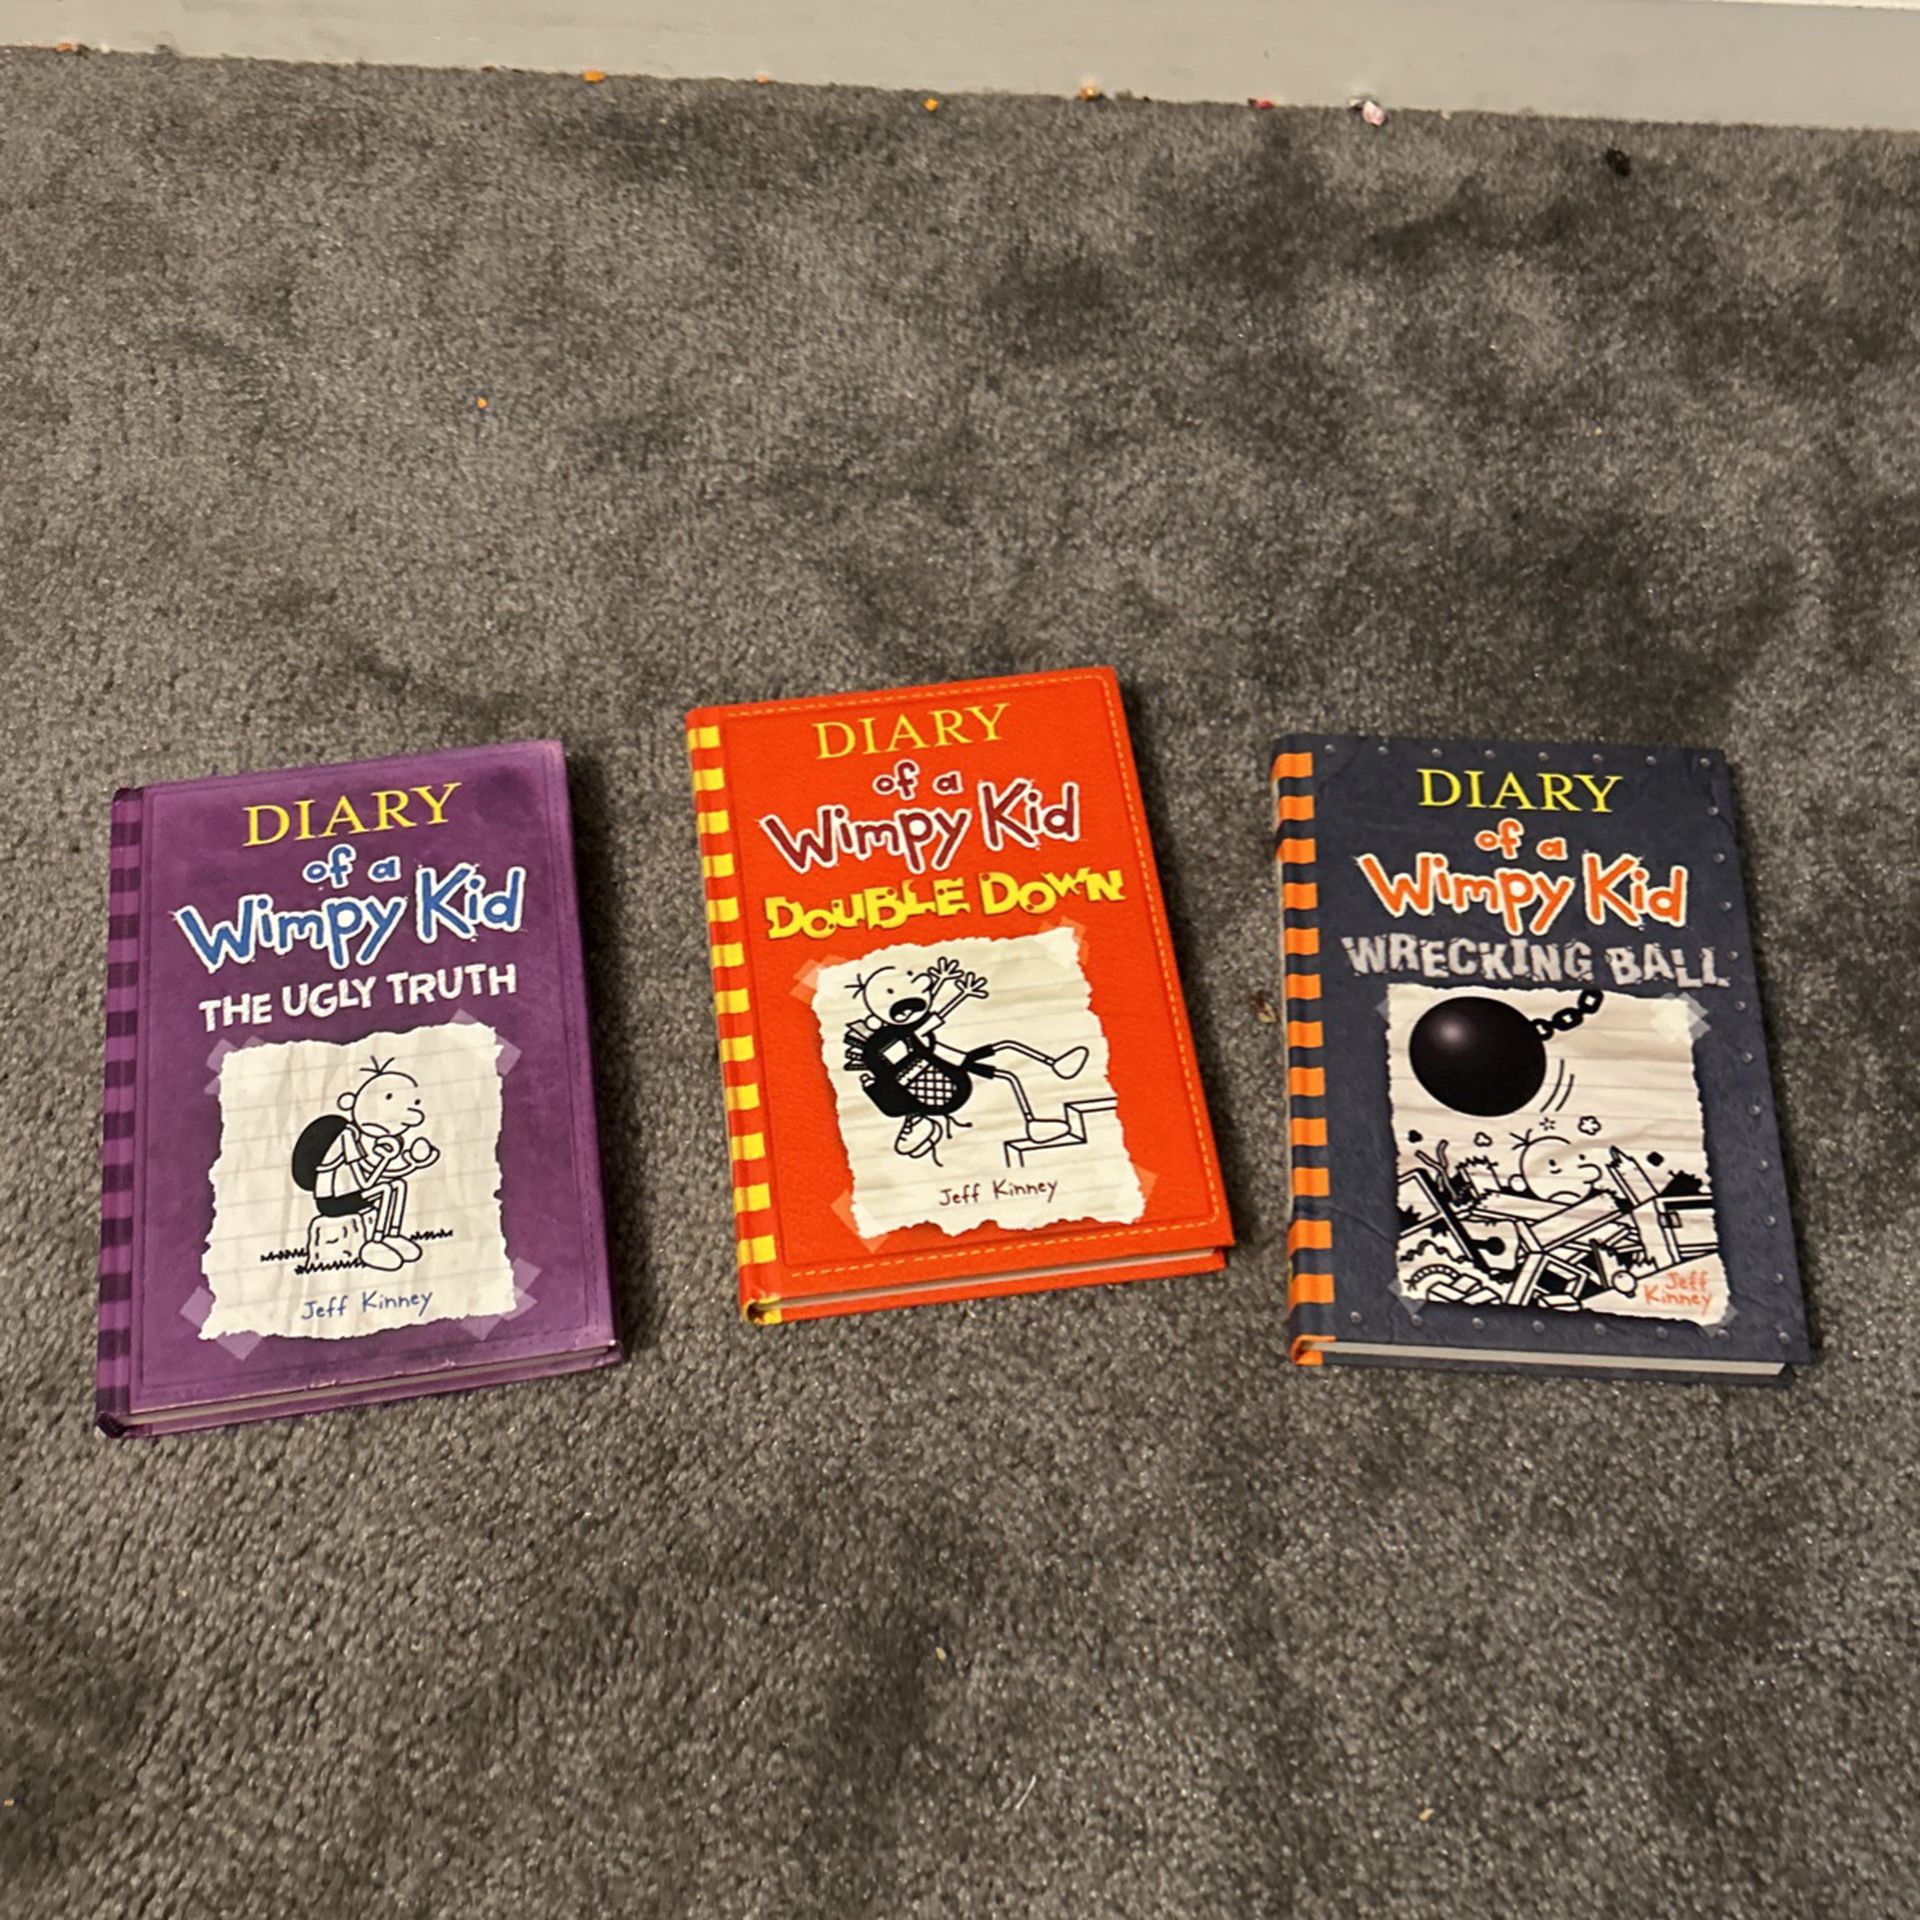 Diary of a Wimpy Kid Books ($5 each)